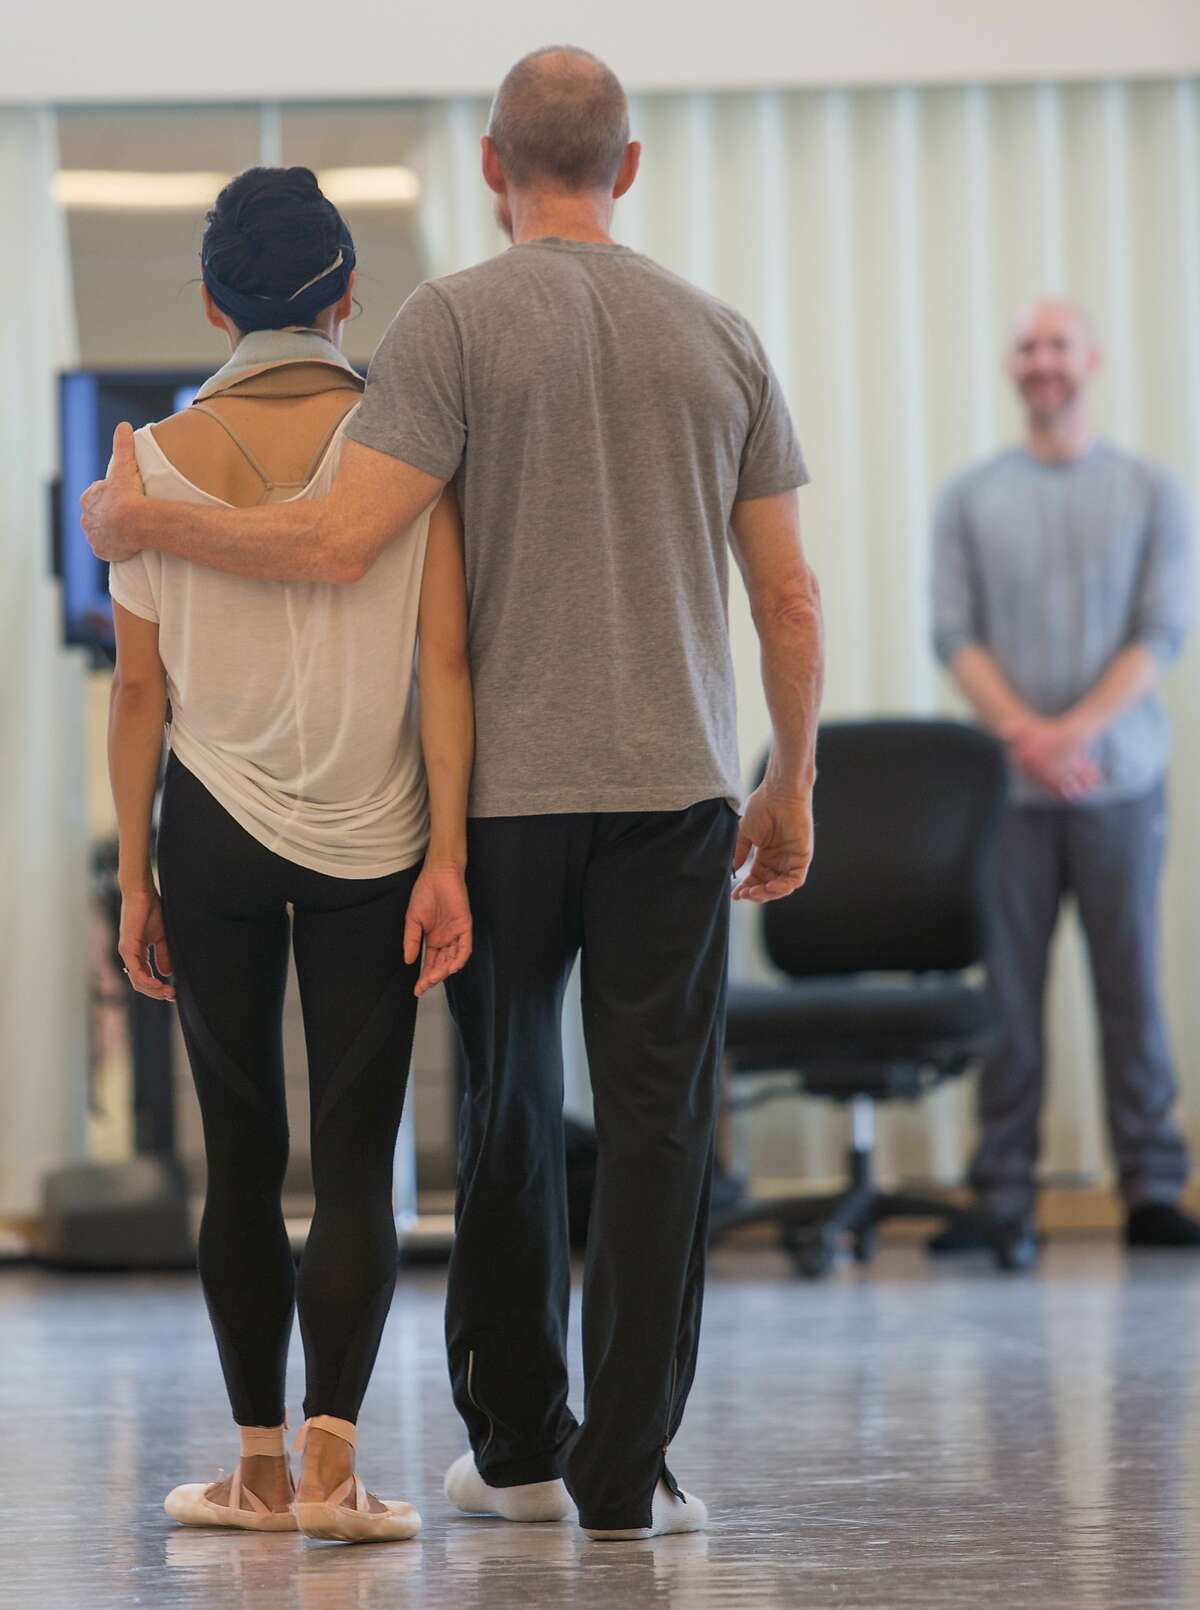 Frances Chung(left) stands next to William Forsythe during a rehearsal at Chris Hellman Center for Dance, home of the San Francisco Ballet, on Thursday, Sept. 17, 2015 in San Francisco, Calif. The most eagerly awaited event in the 2016 SF Ballet season is the North American premiere of William Forsythe?•s ?’Pas/Parts,?“ made originally for the Paris Opera Ballet.